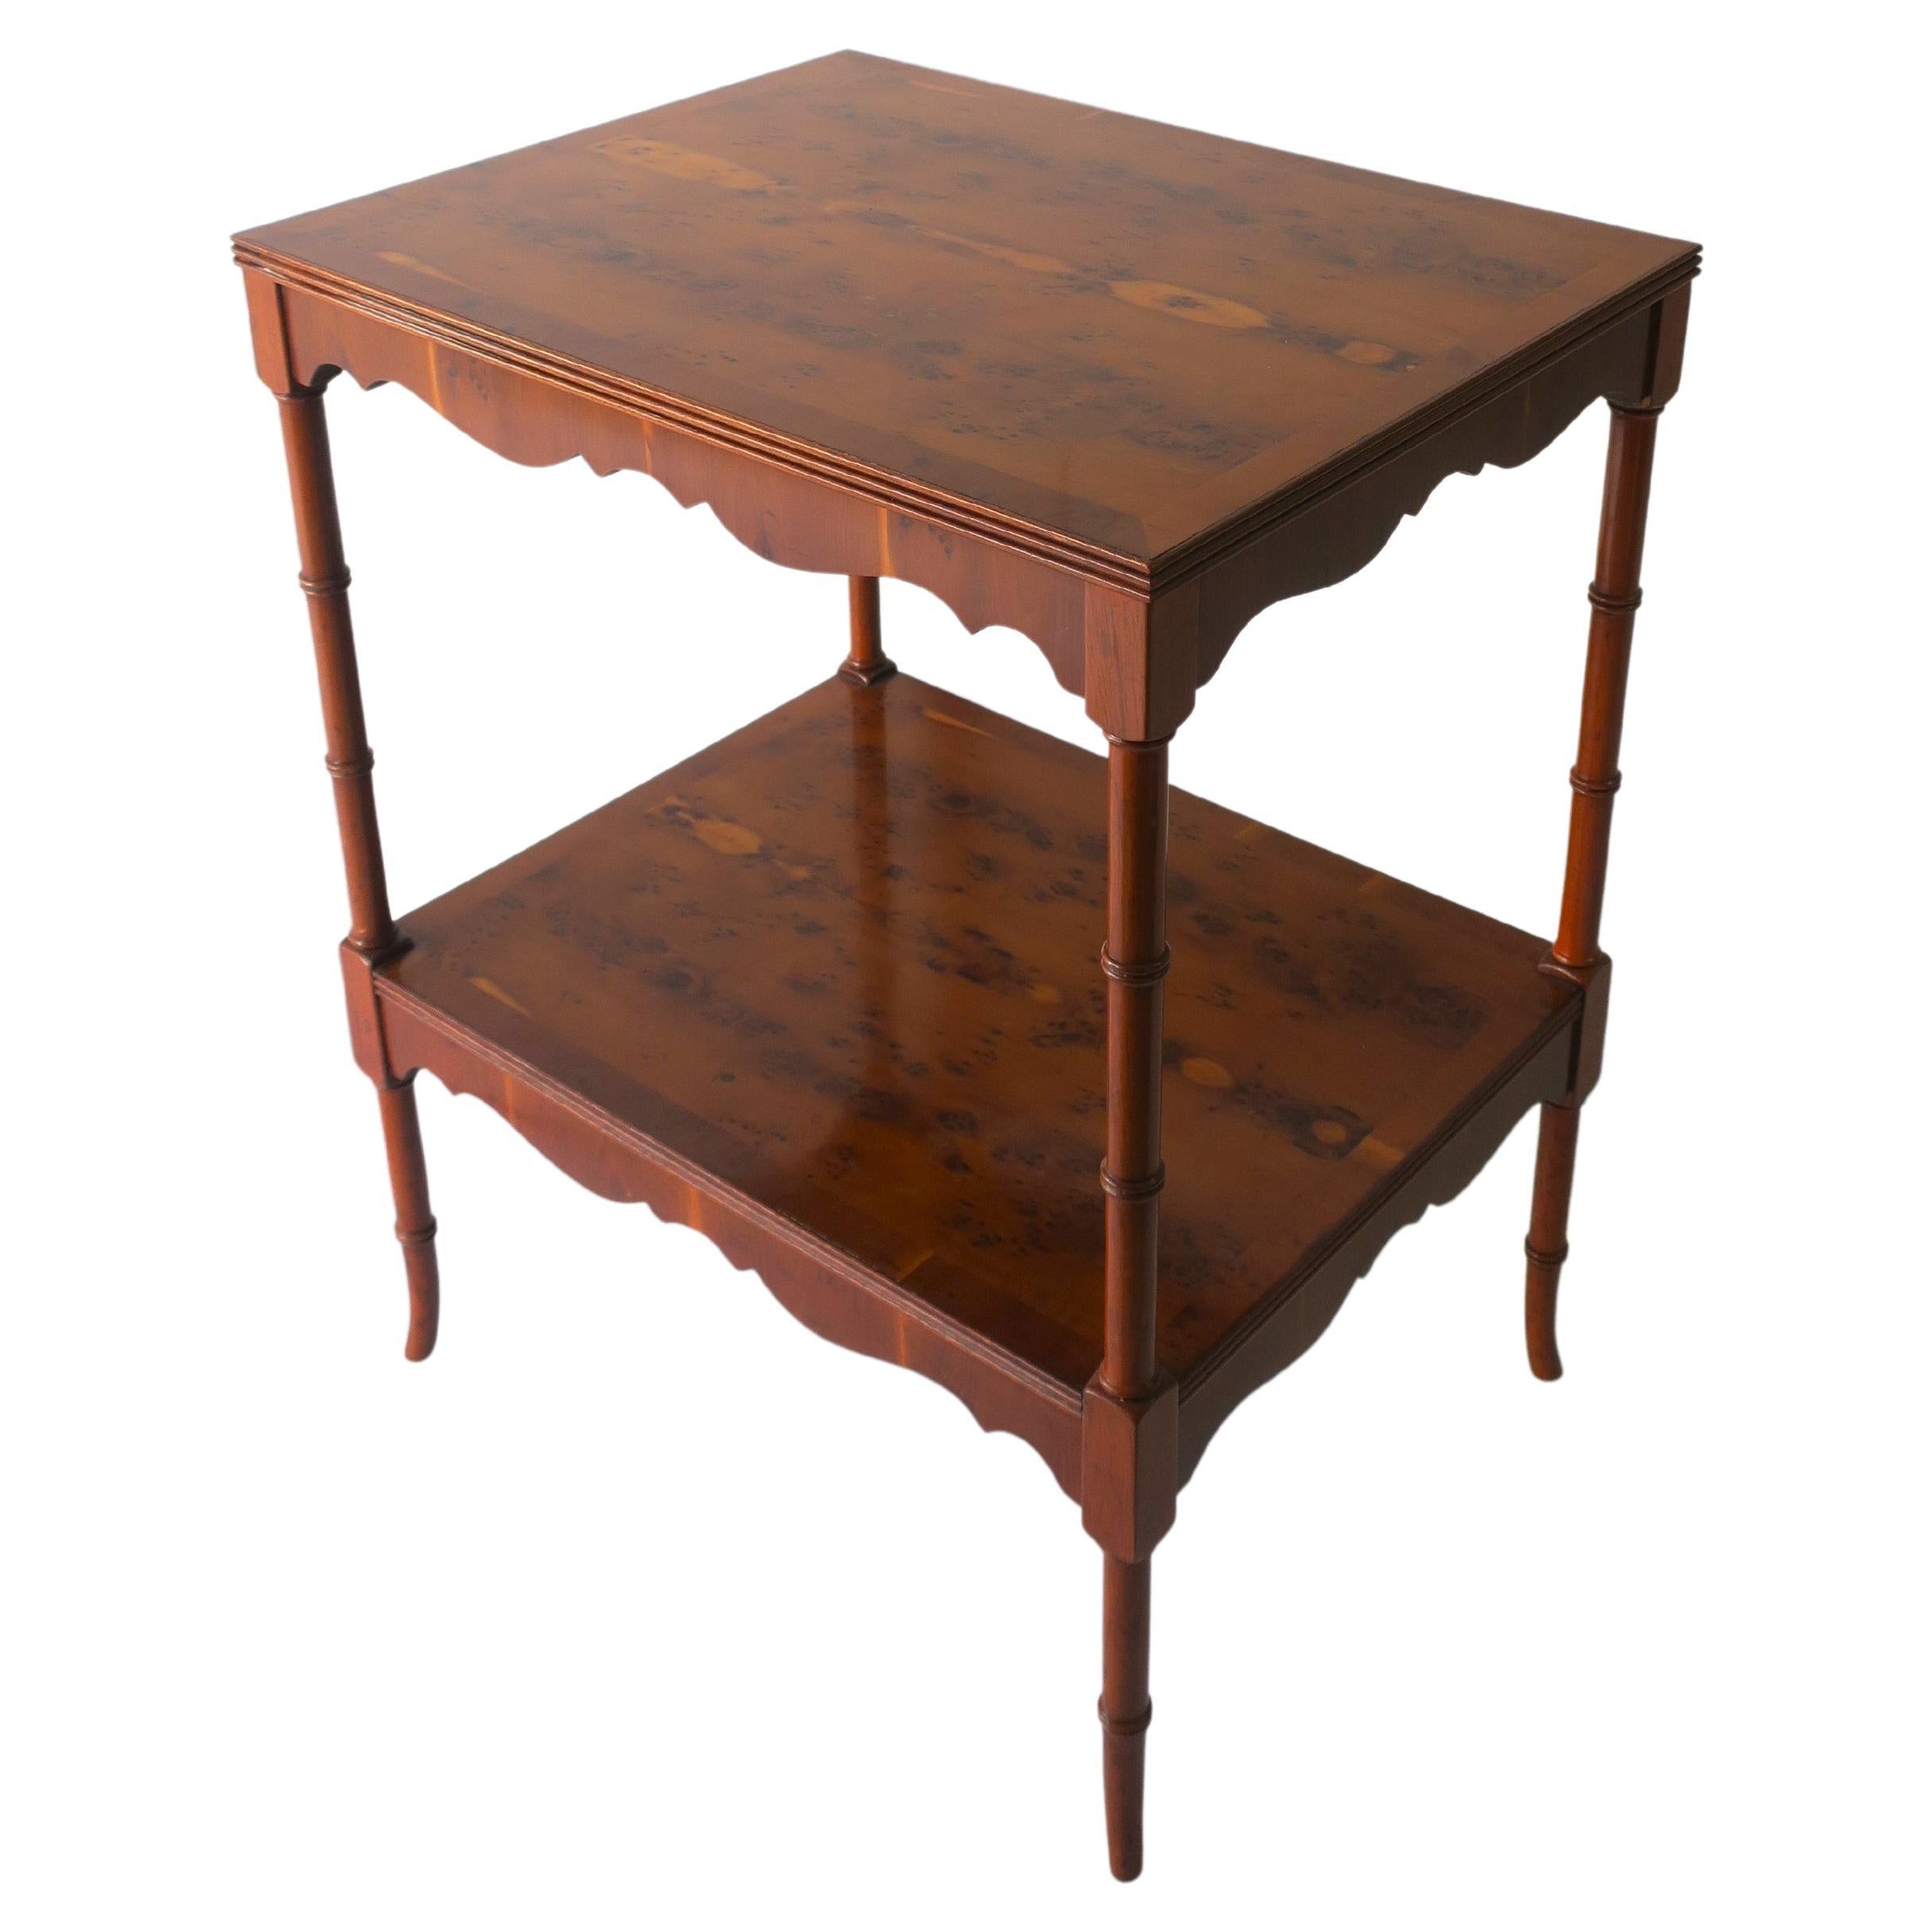 English Birdseye Maple Wood Side or End Table with Shelf and Bamboo-Esque Legs For Sale